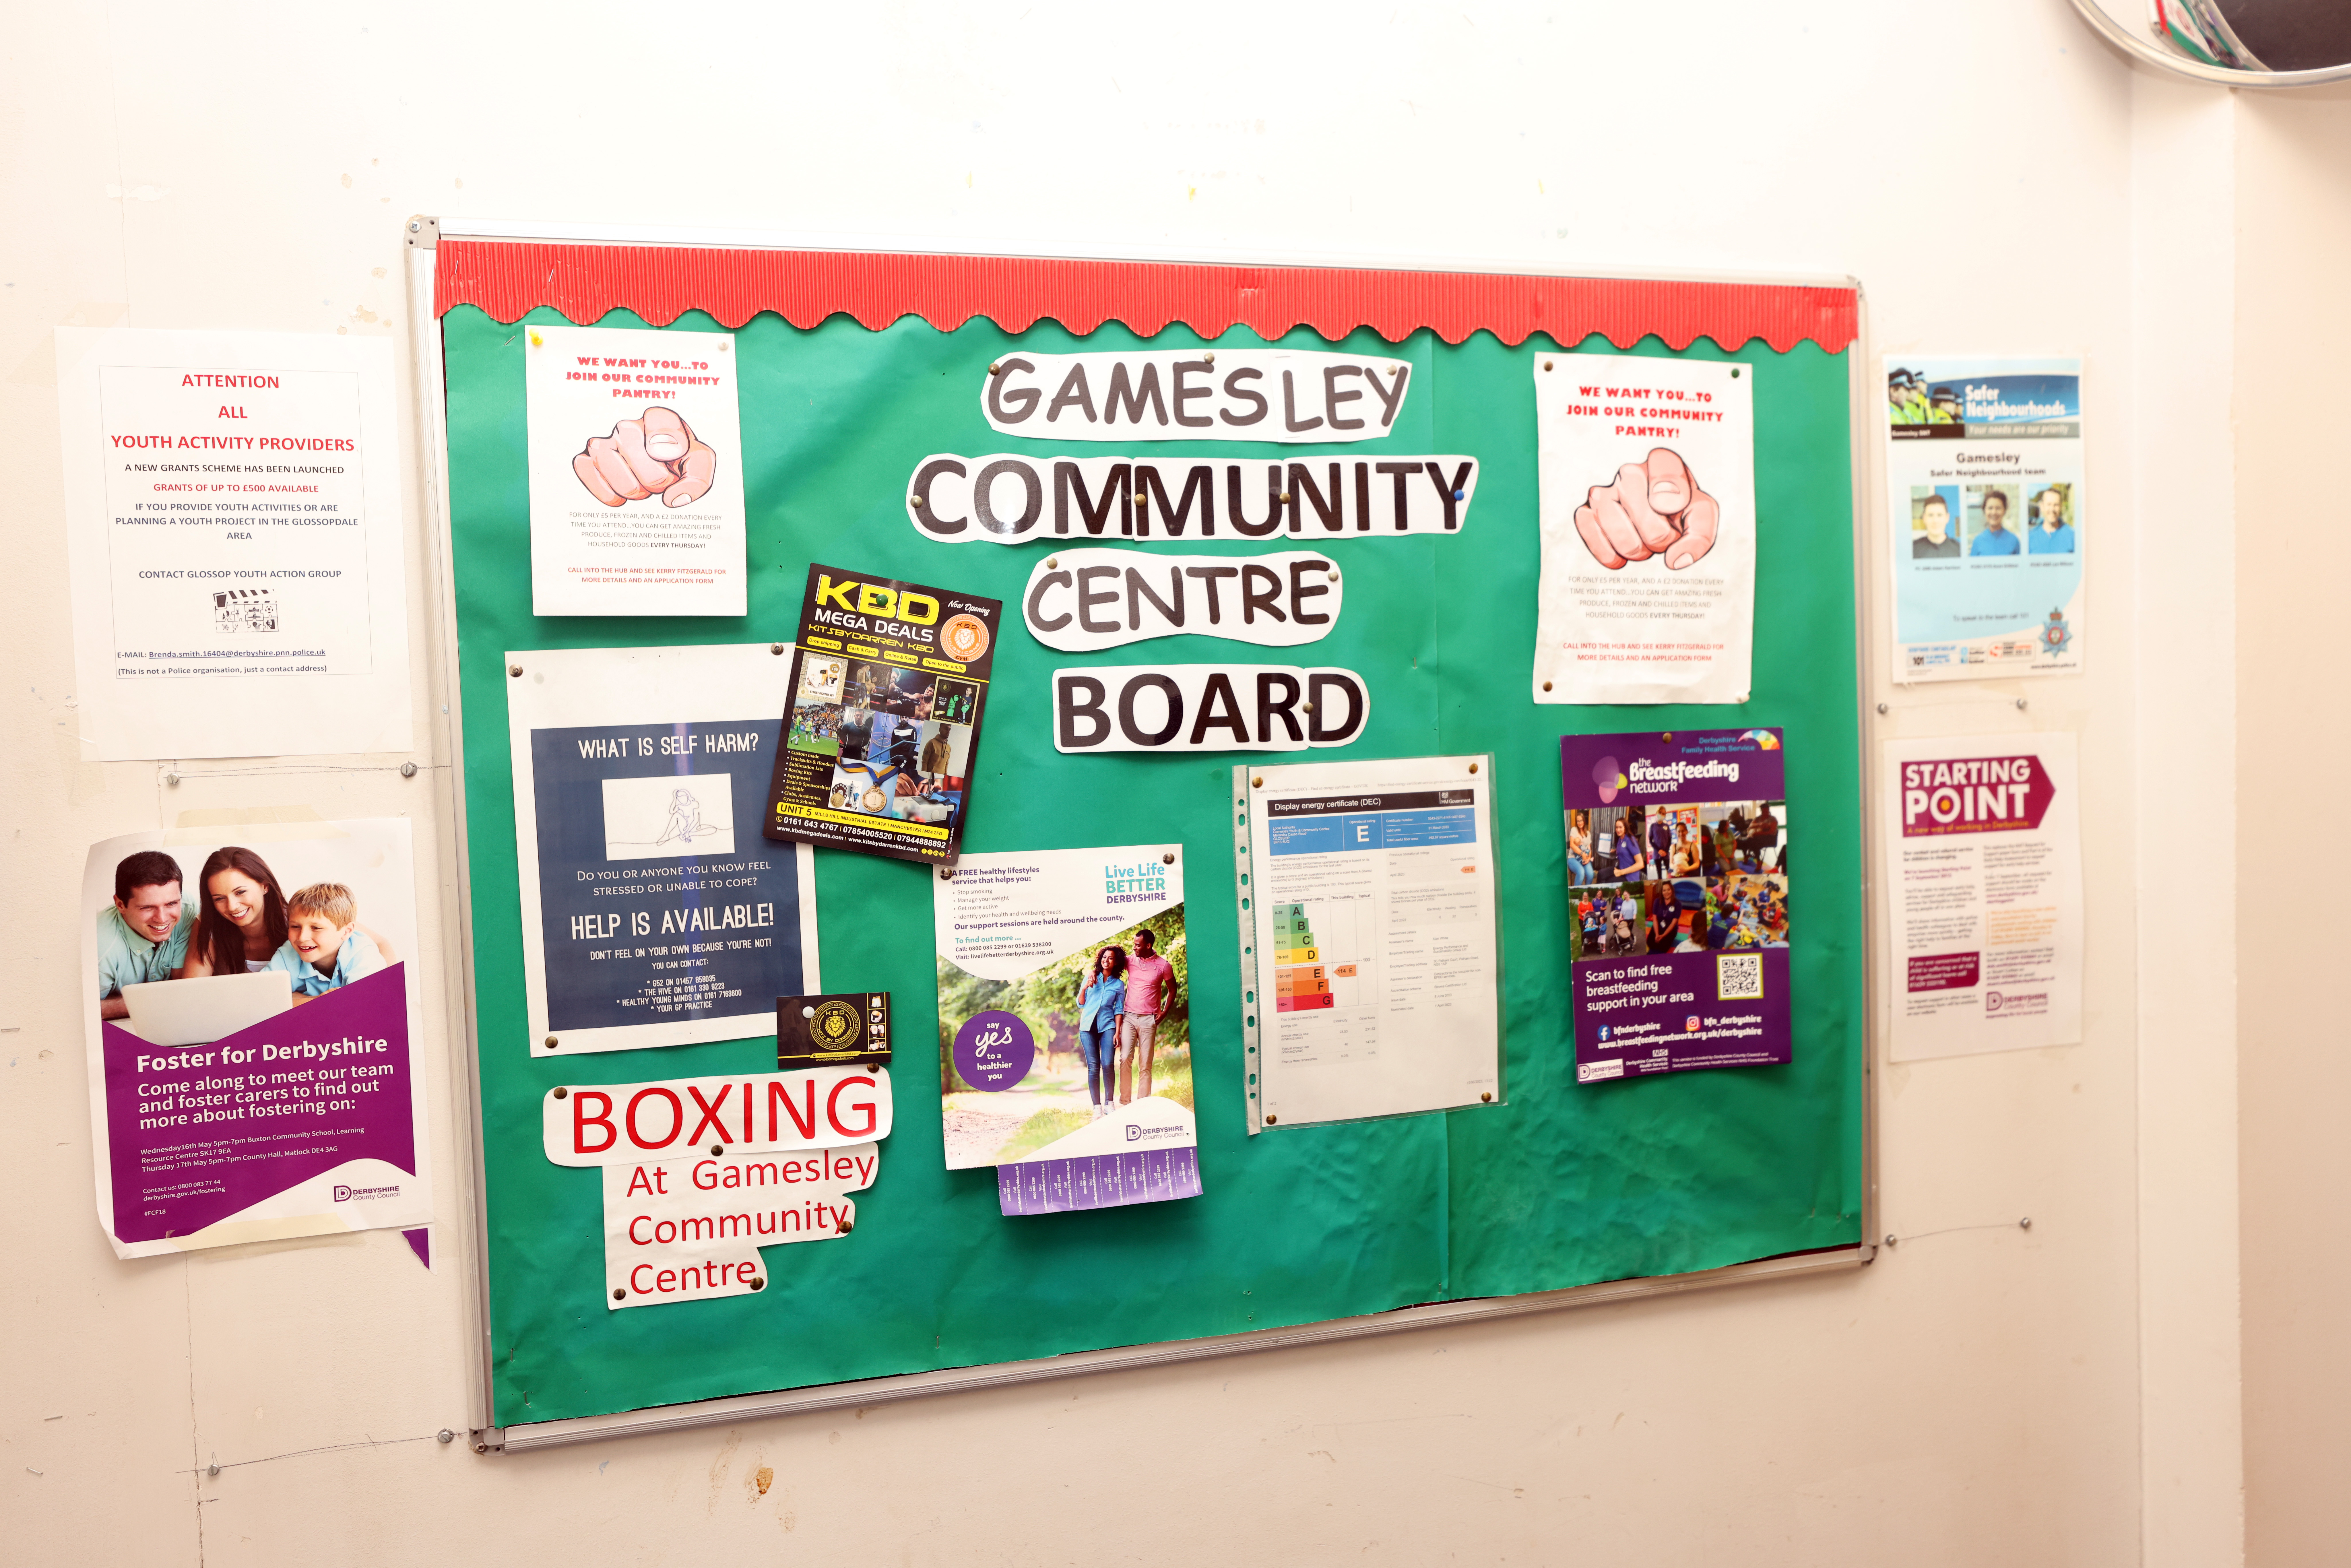 She said the Gamesley community centre is the only outlet for kids